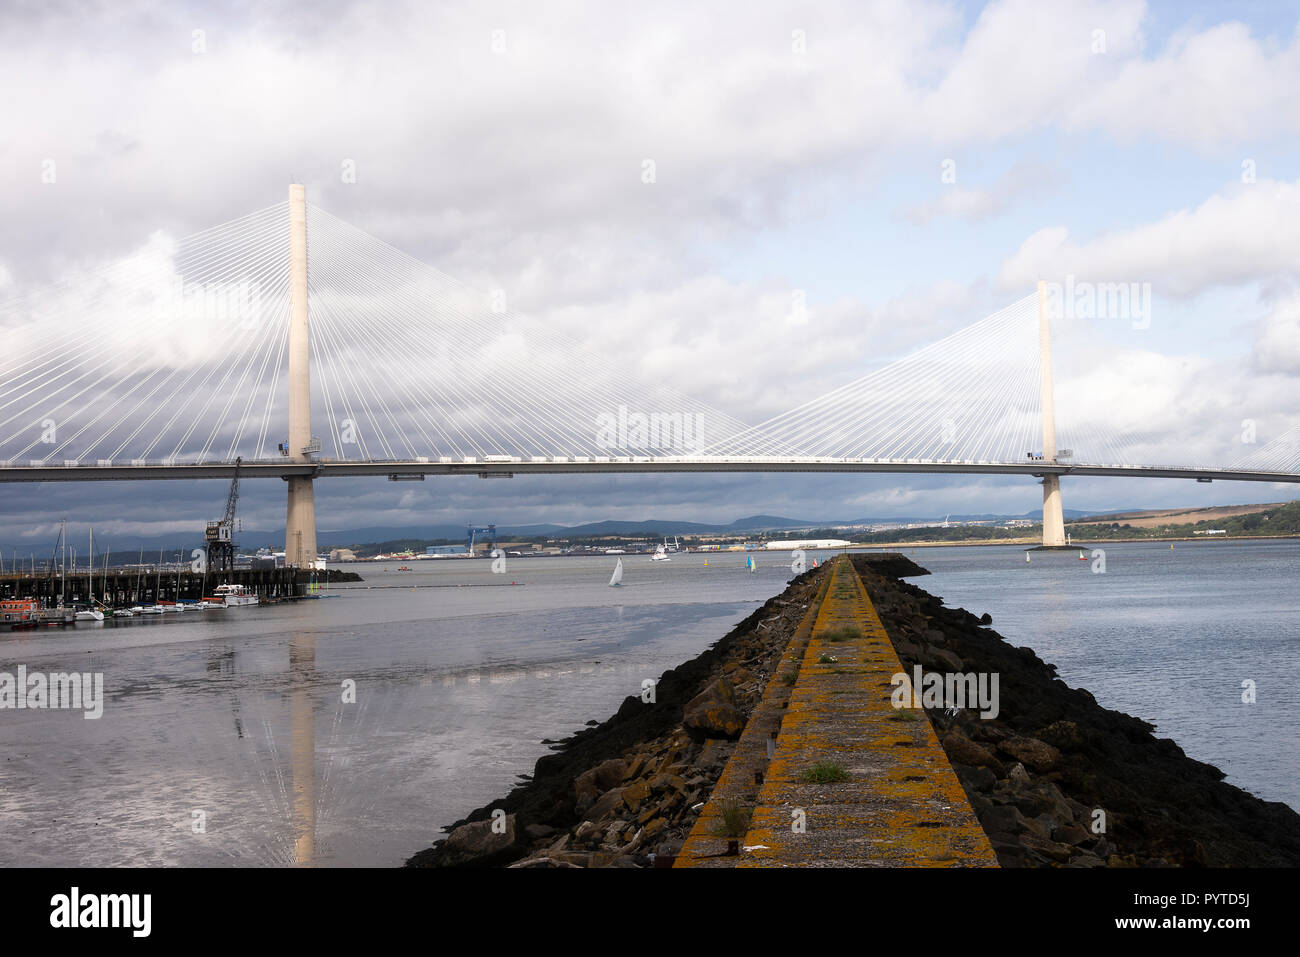 The New Queensferry Road Bridge Crossing the Firth of Forth Between Edinburgh and South Queensferry Scotland United Kingdom UK Stock Photo